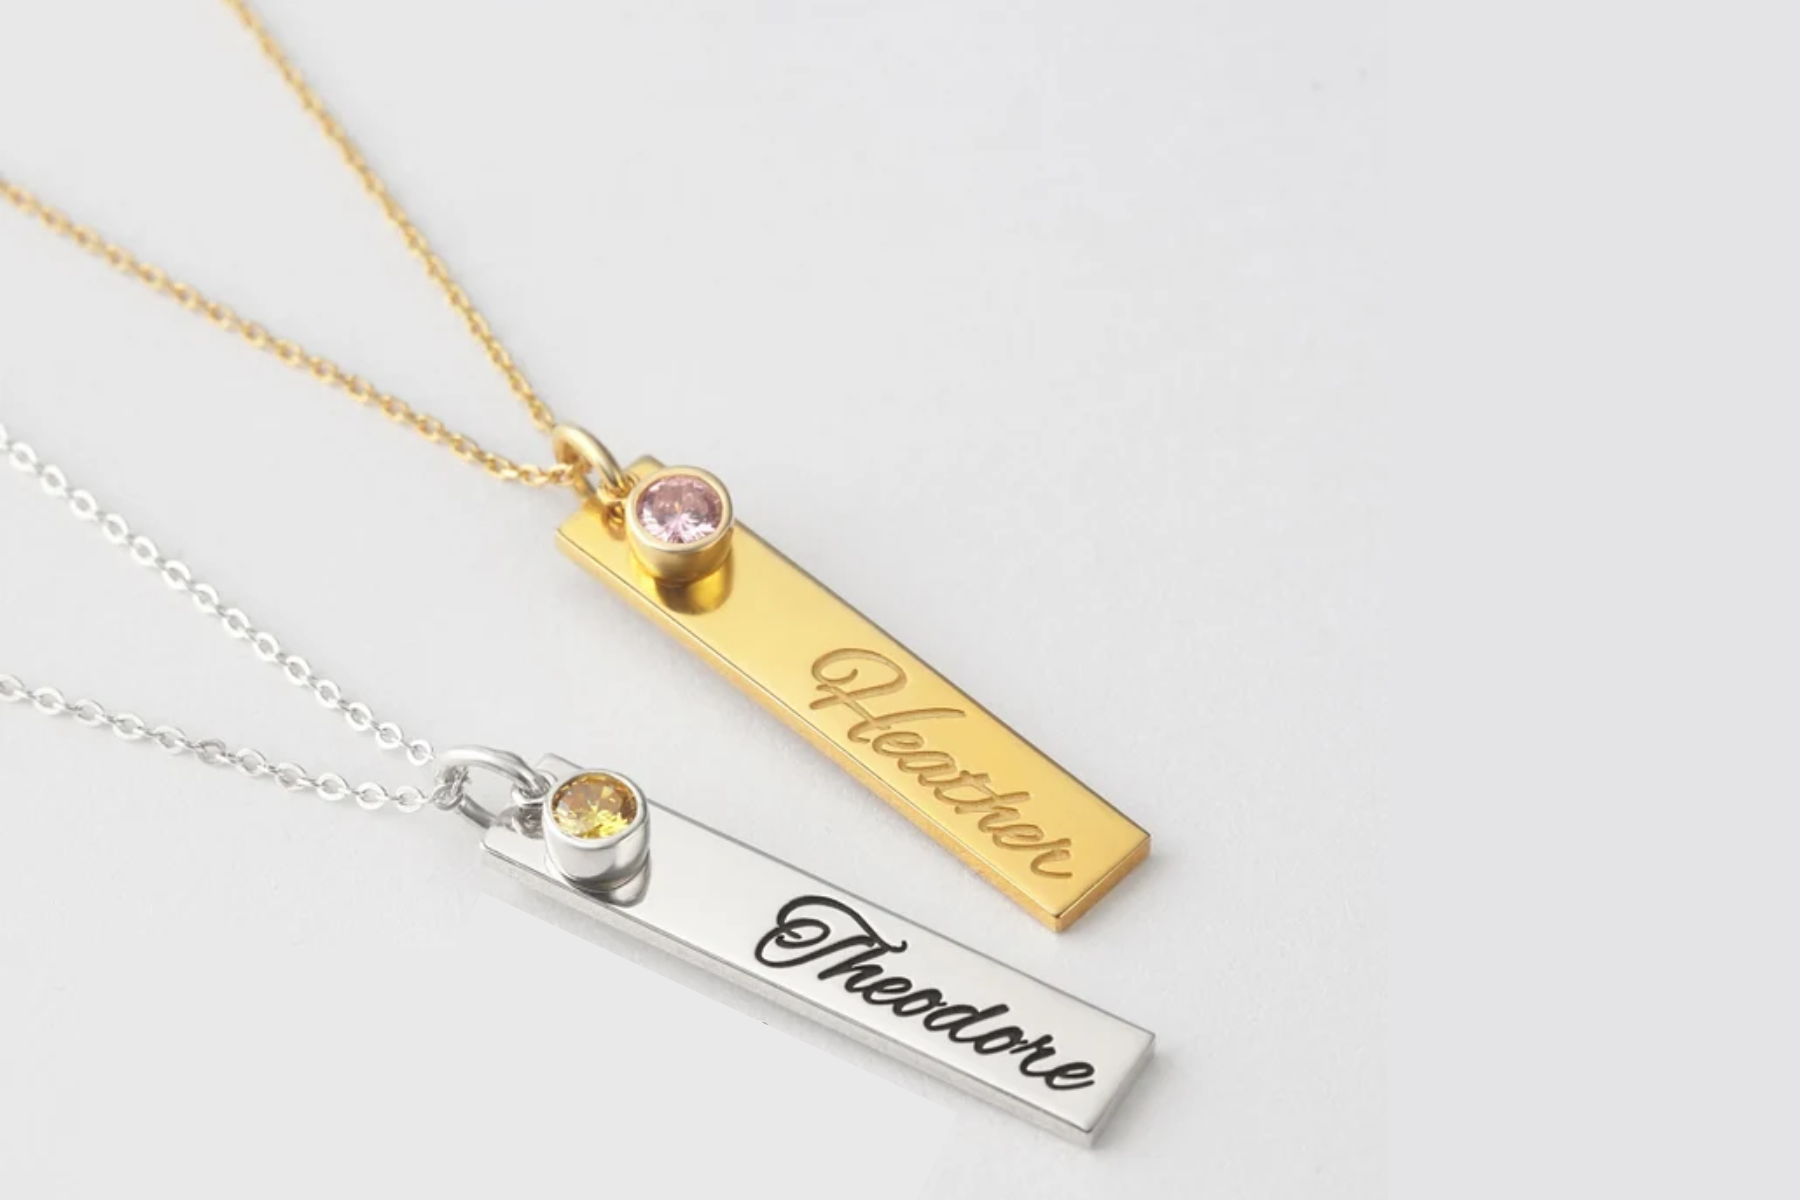 Long gold and silver pendant with engraved grandchild's name